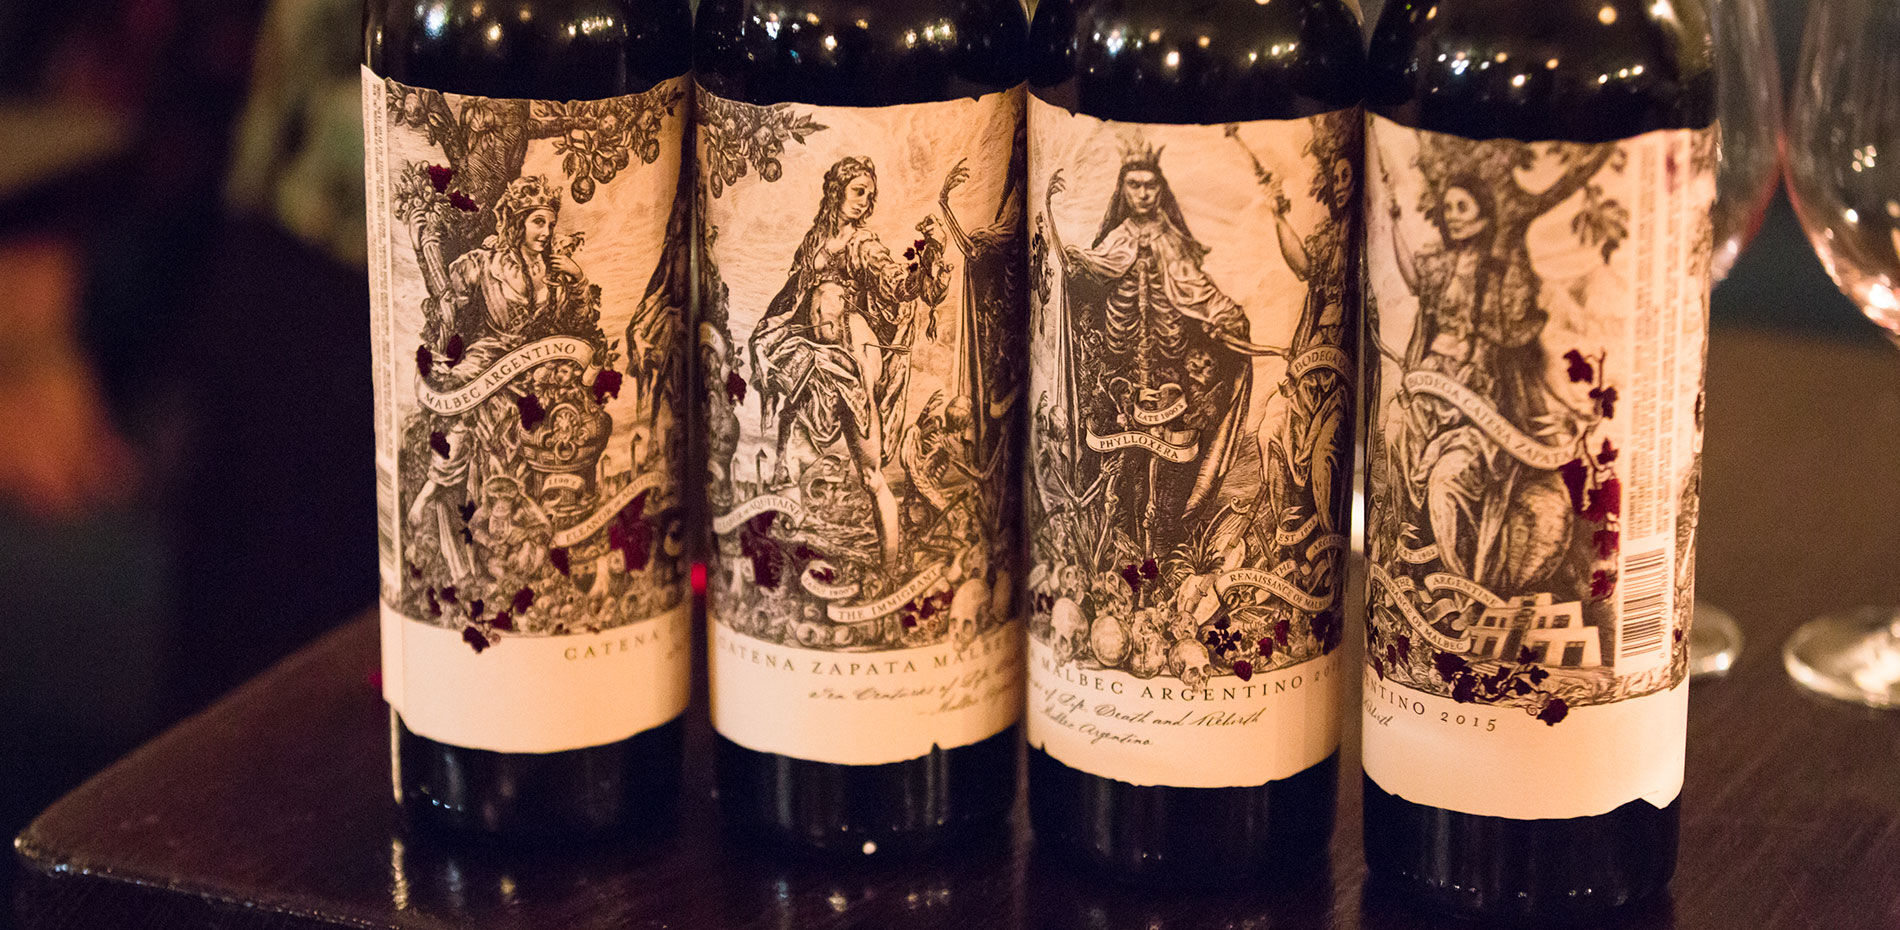 Catena unveils new label design inspired by the history of Malbec